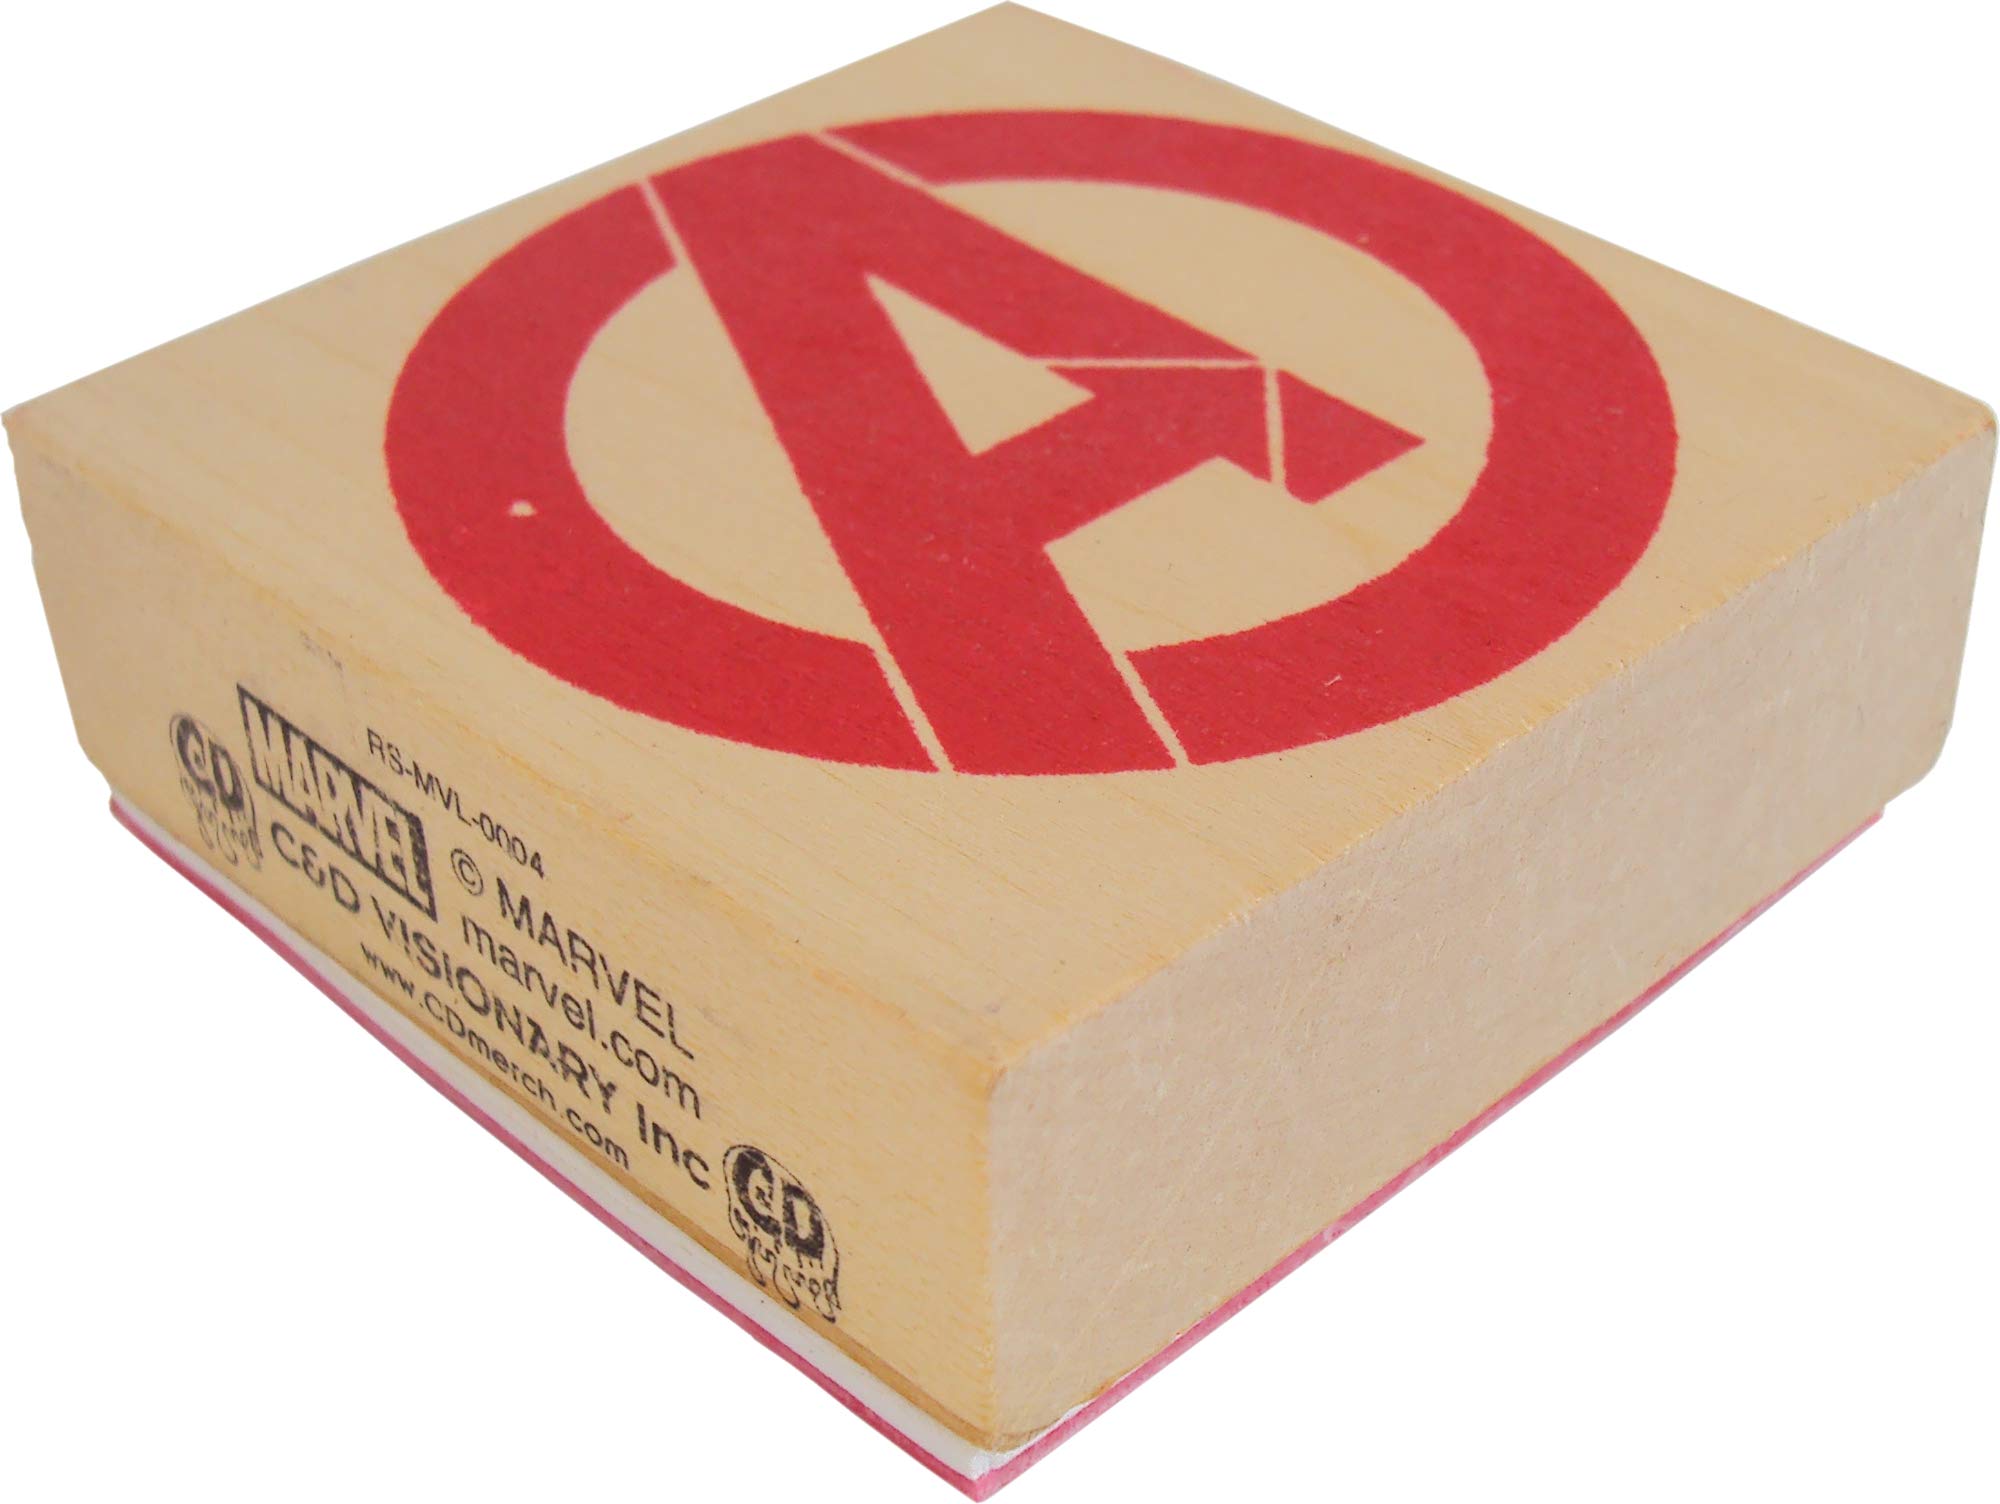 Square Deal Recordings & Supplies The Avengers A Logo Rubber Stamp